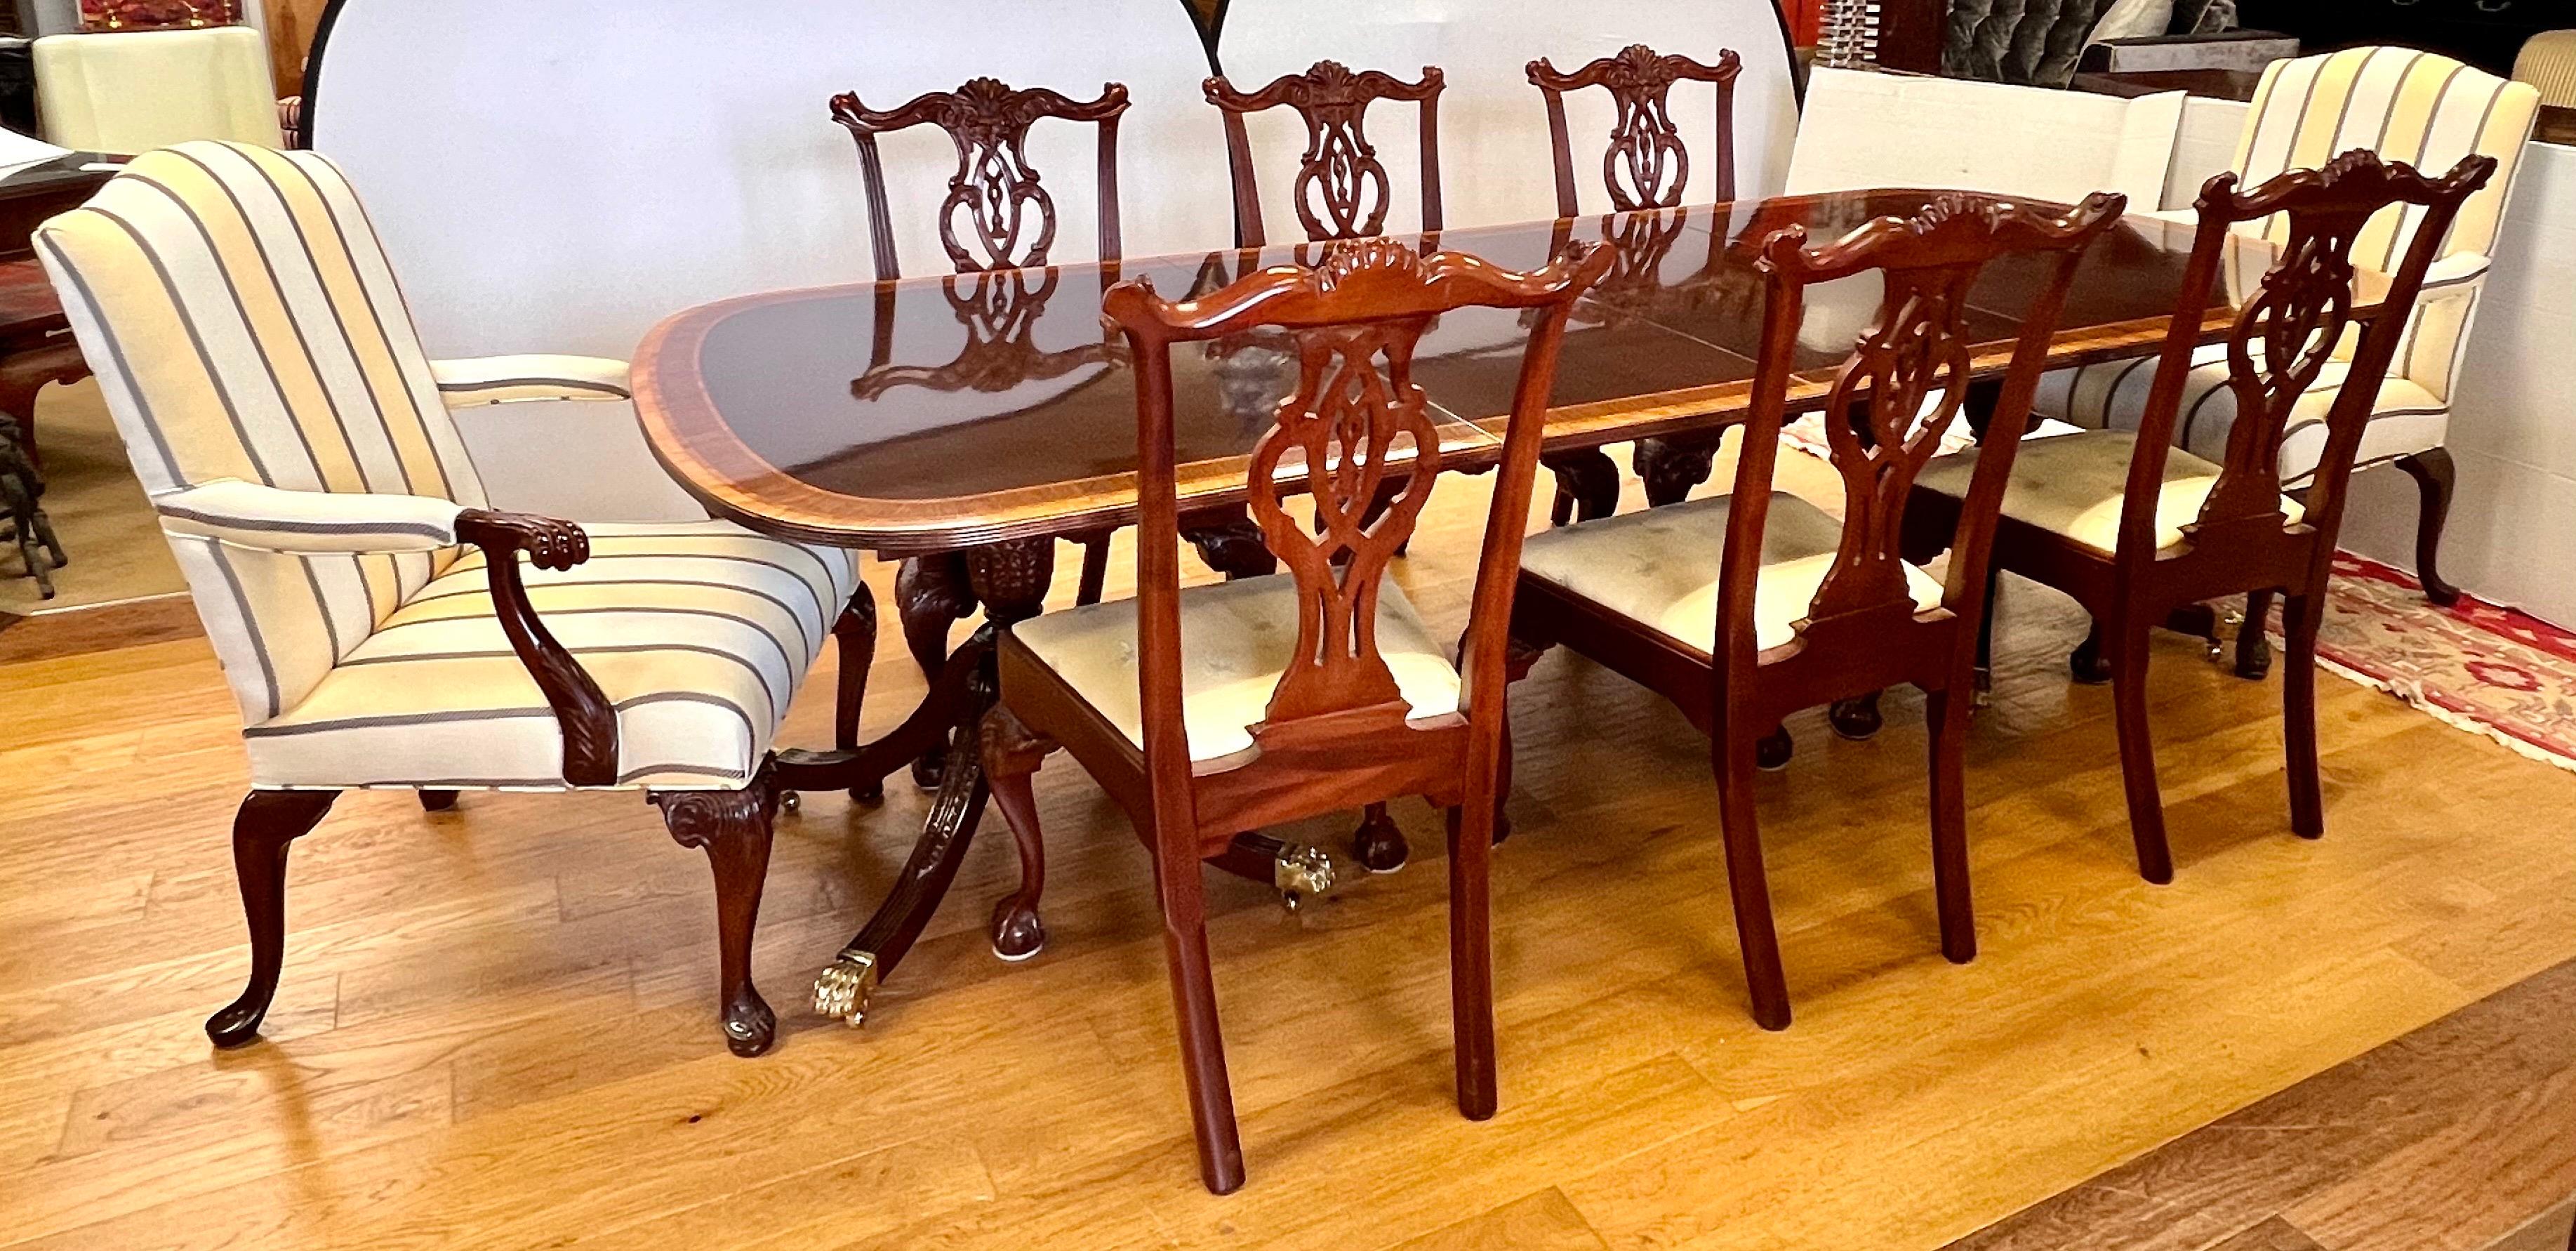 Federal Councill Craftsman Flame Mahogany Inlay Expandable Dining Table & 8 Chairs Set